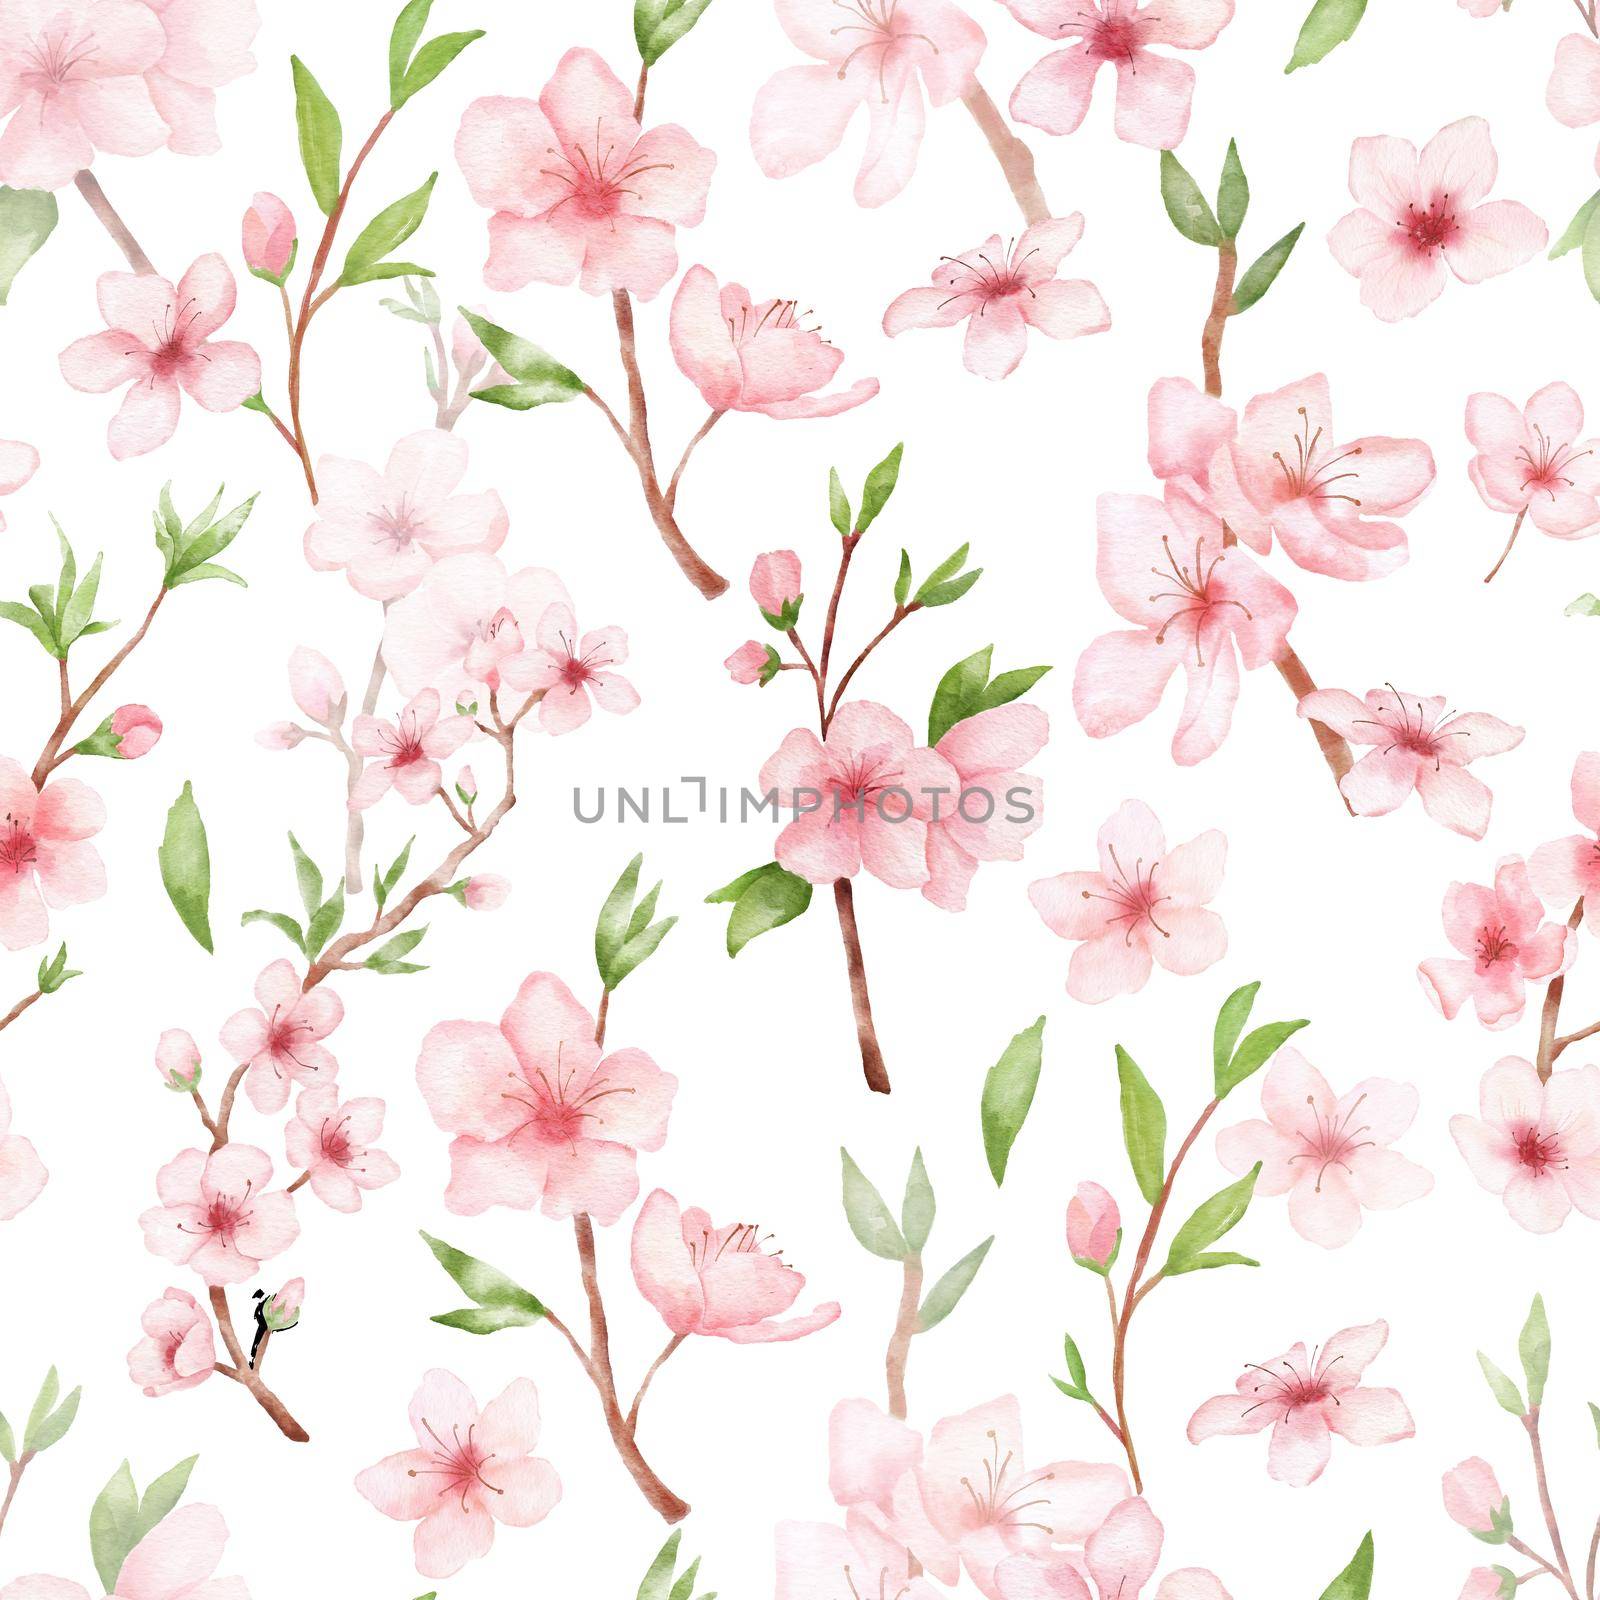 Branch of Cherry blossom watercolor seamless pattern on white backgraund. Japanese flowers. Floral background by ElenaPlatova